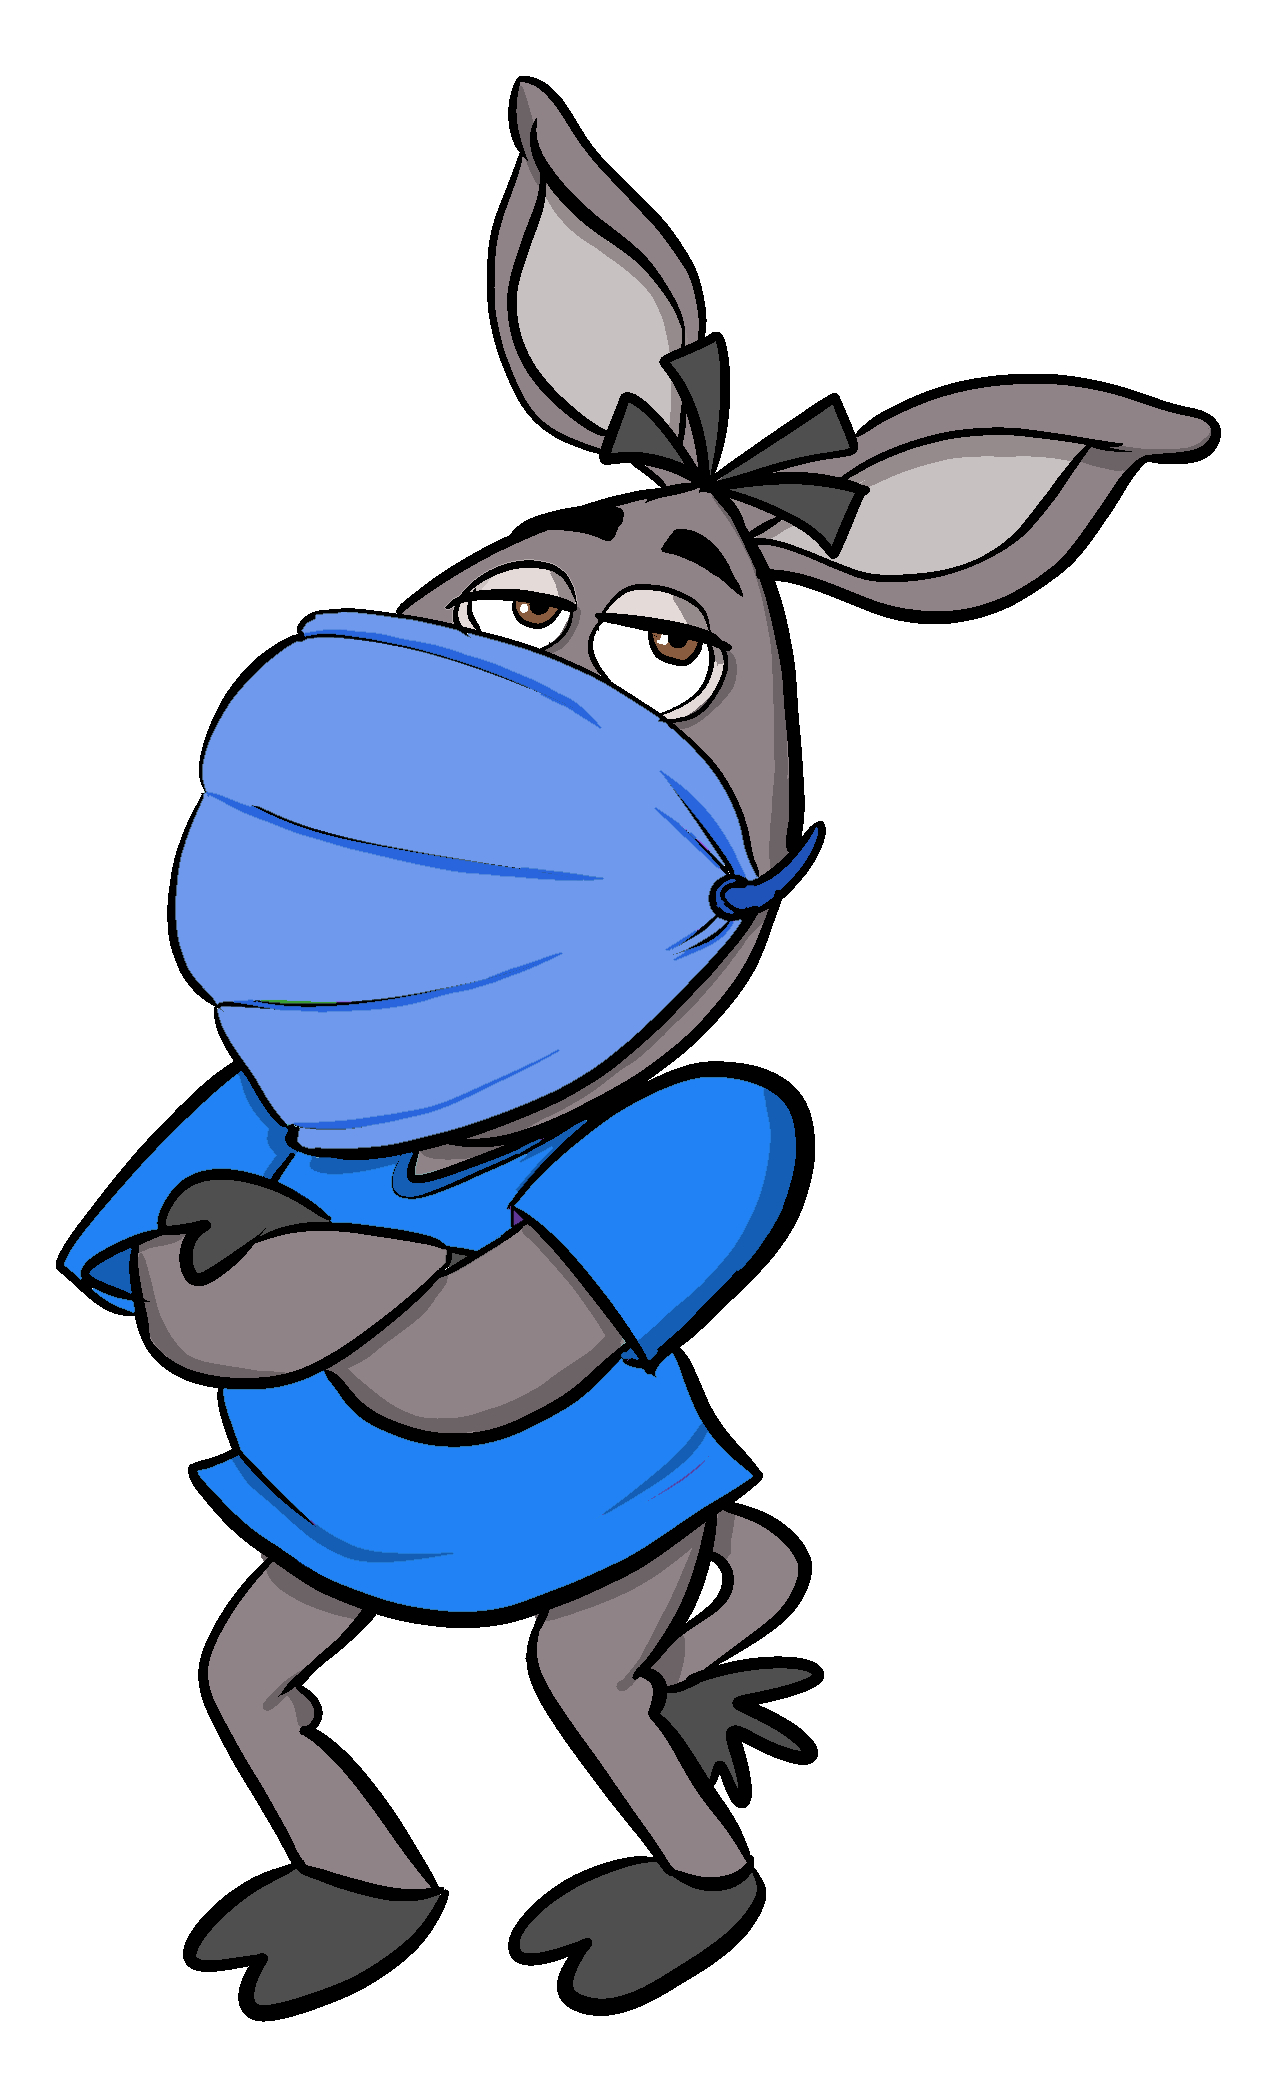 Illustration of the Jackass Letters Mascot wearing a surgical mask.